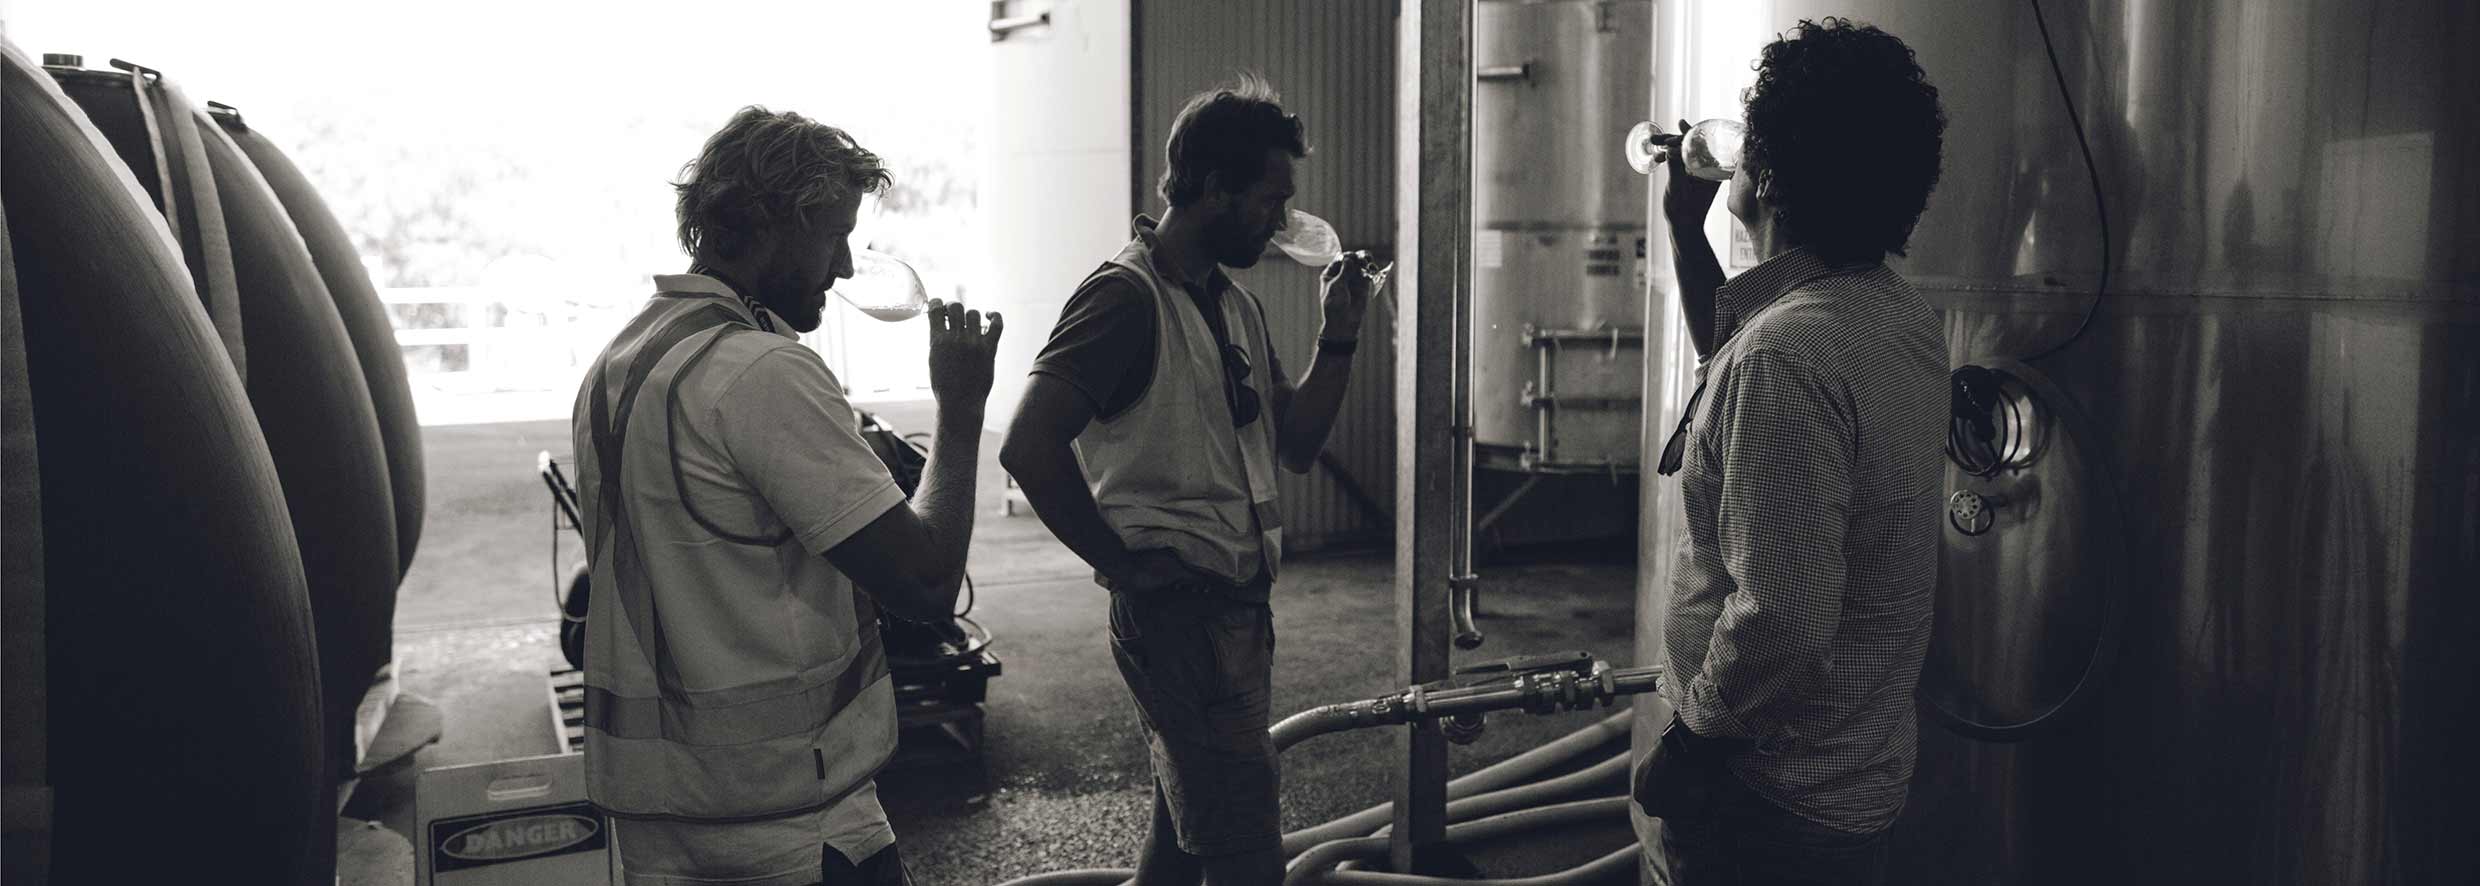 black and white image of three men sampling wine from wine glasses stood among steel and earthenware winemaking tanks, pipes across the floor, a large open door behind them letting in the bright sunlight.